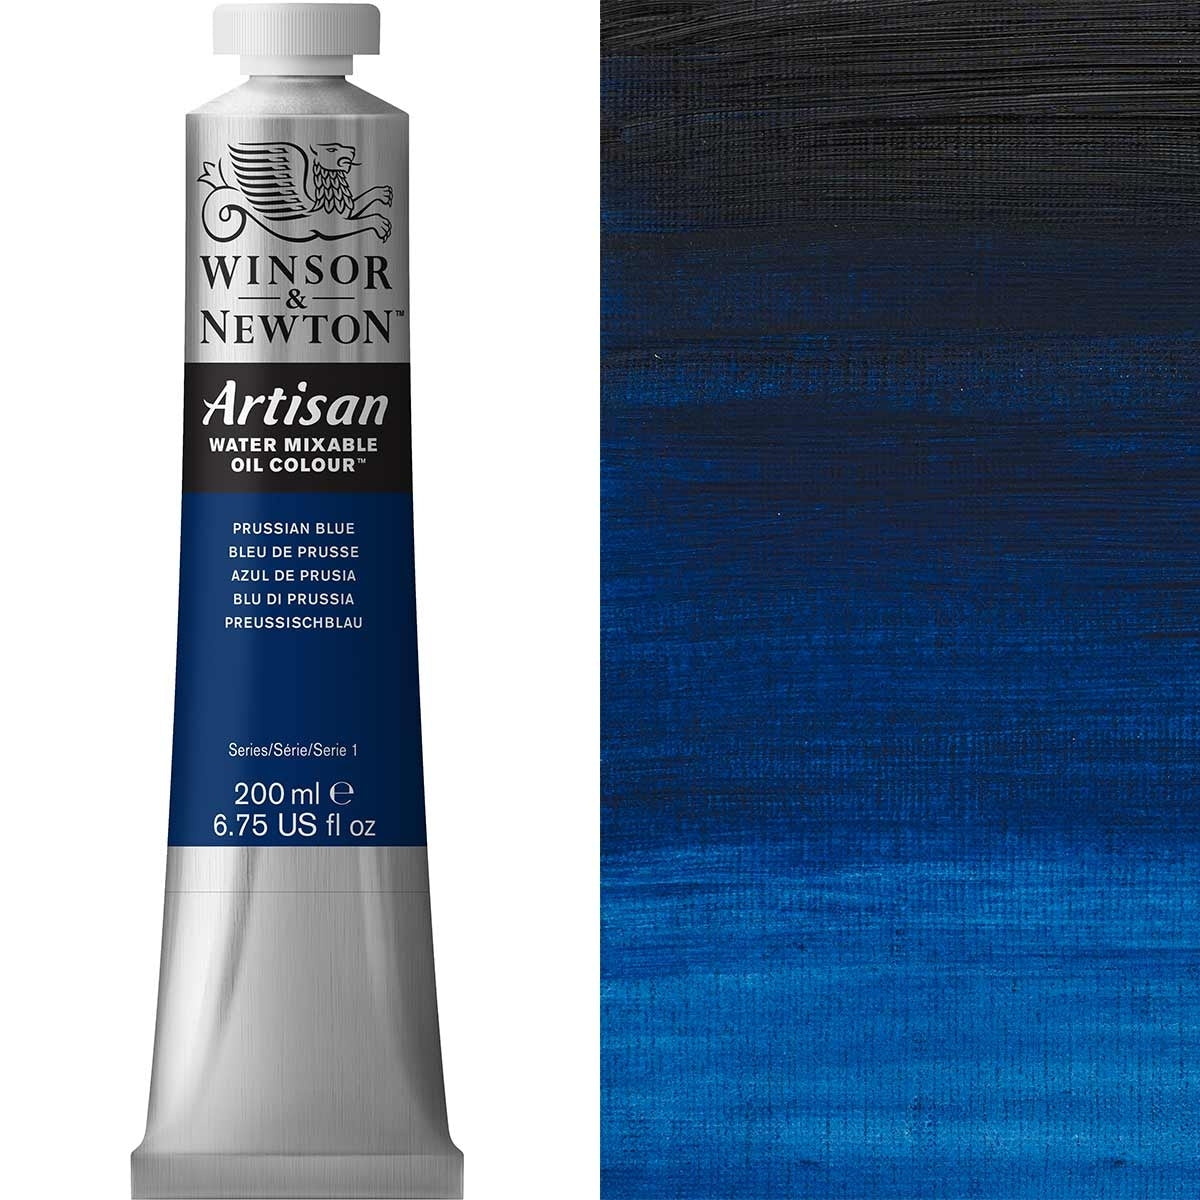 Winsor and Newton - Artisan Oil Colour Watermixable - 200ml - Prussian Blue